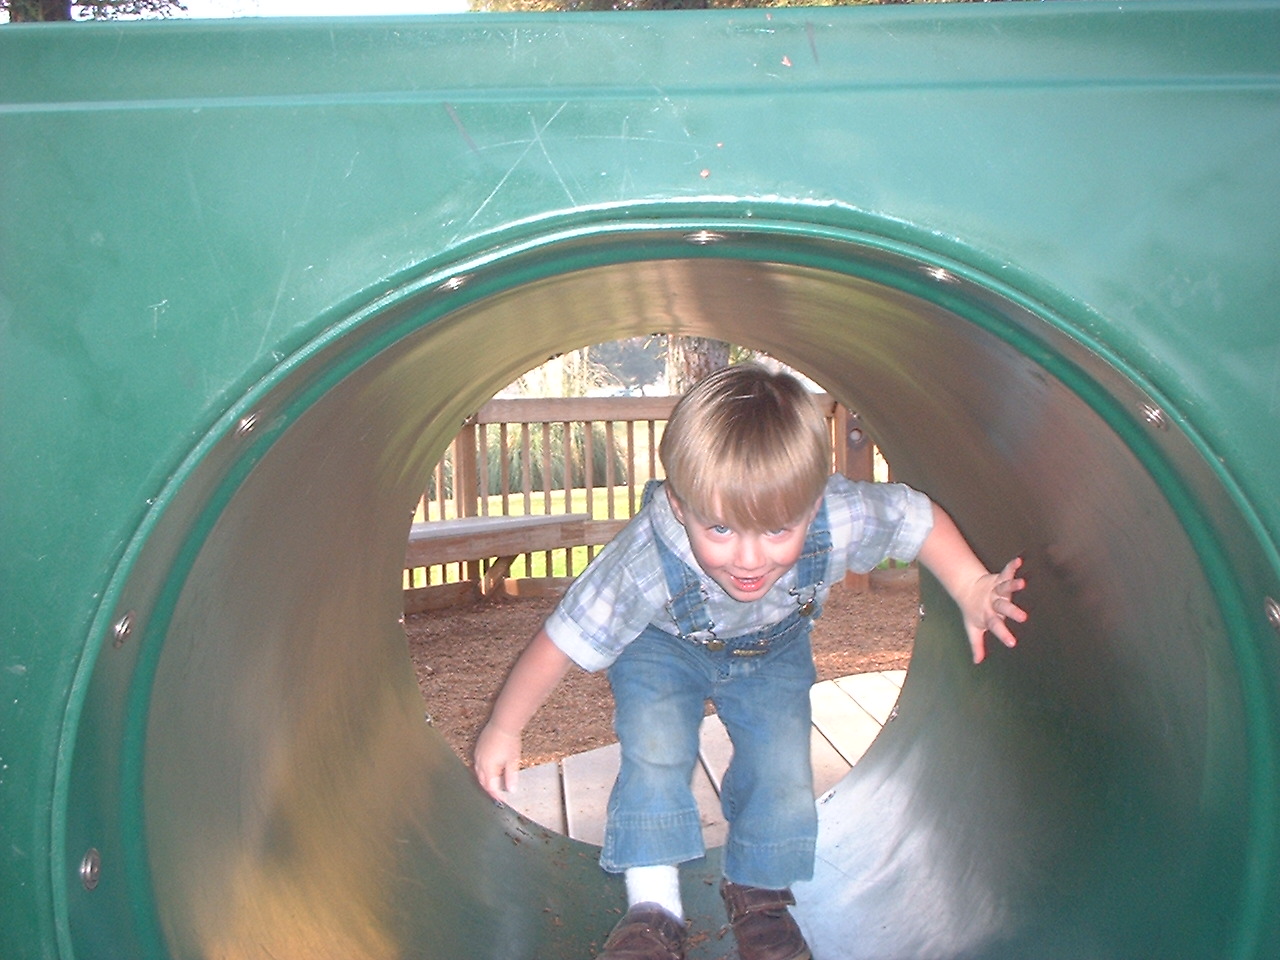 child playing on playground structure [IMG]